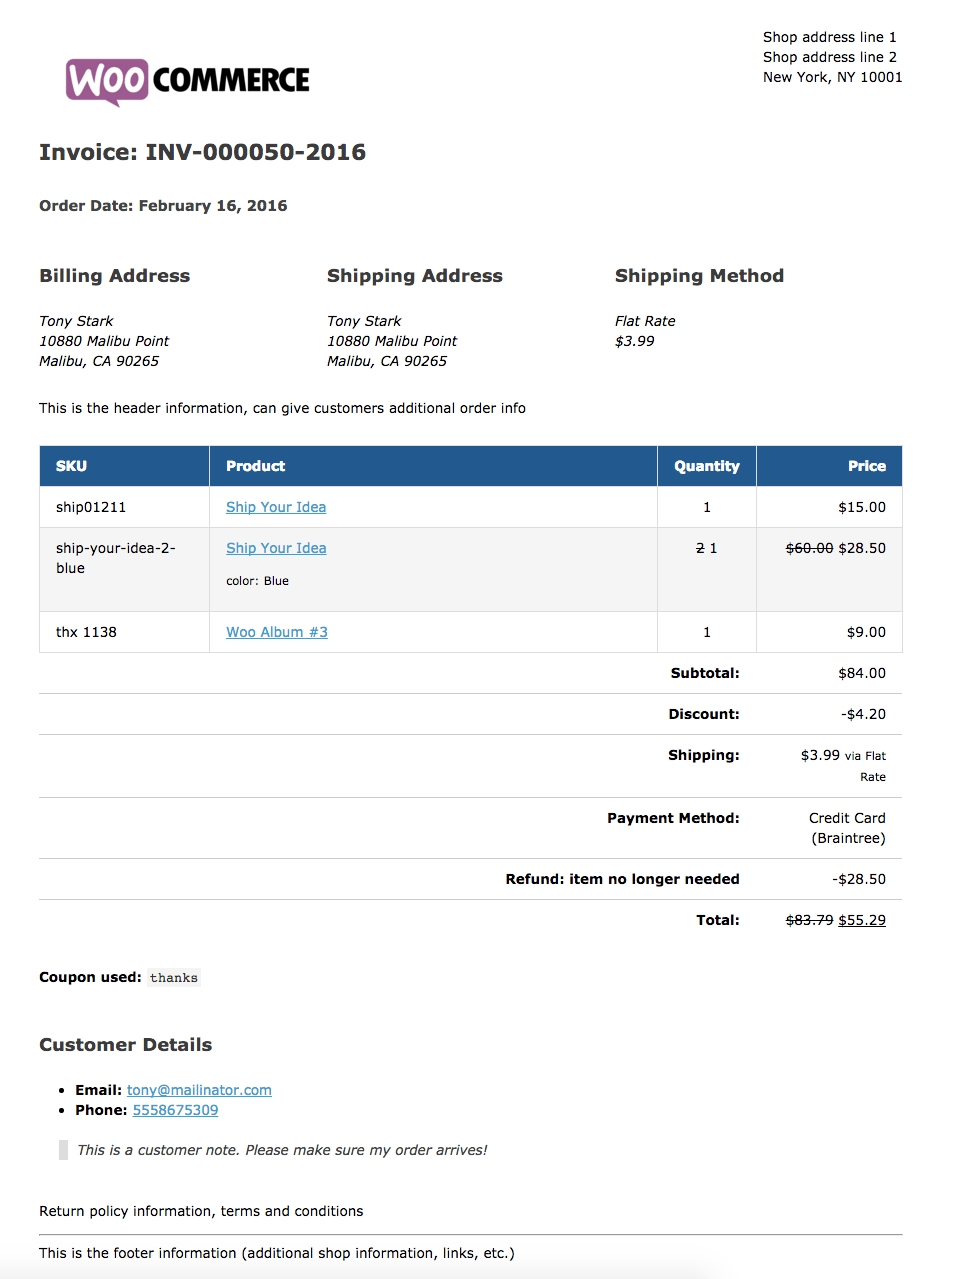 woocommerce print invoices amp packing lists woocommerce docs sample invoice number